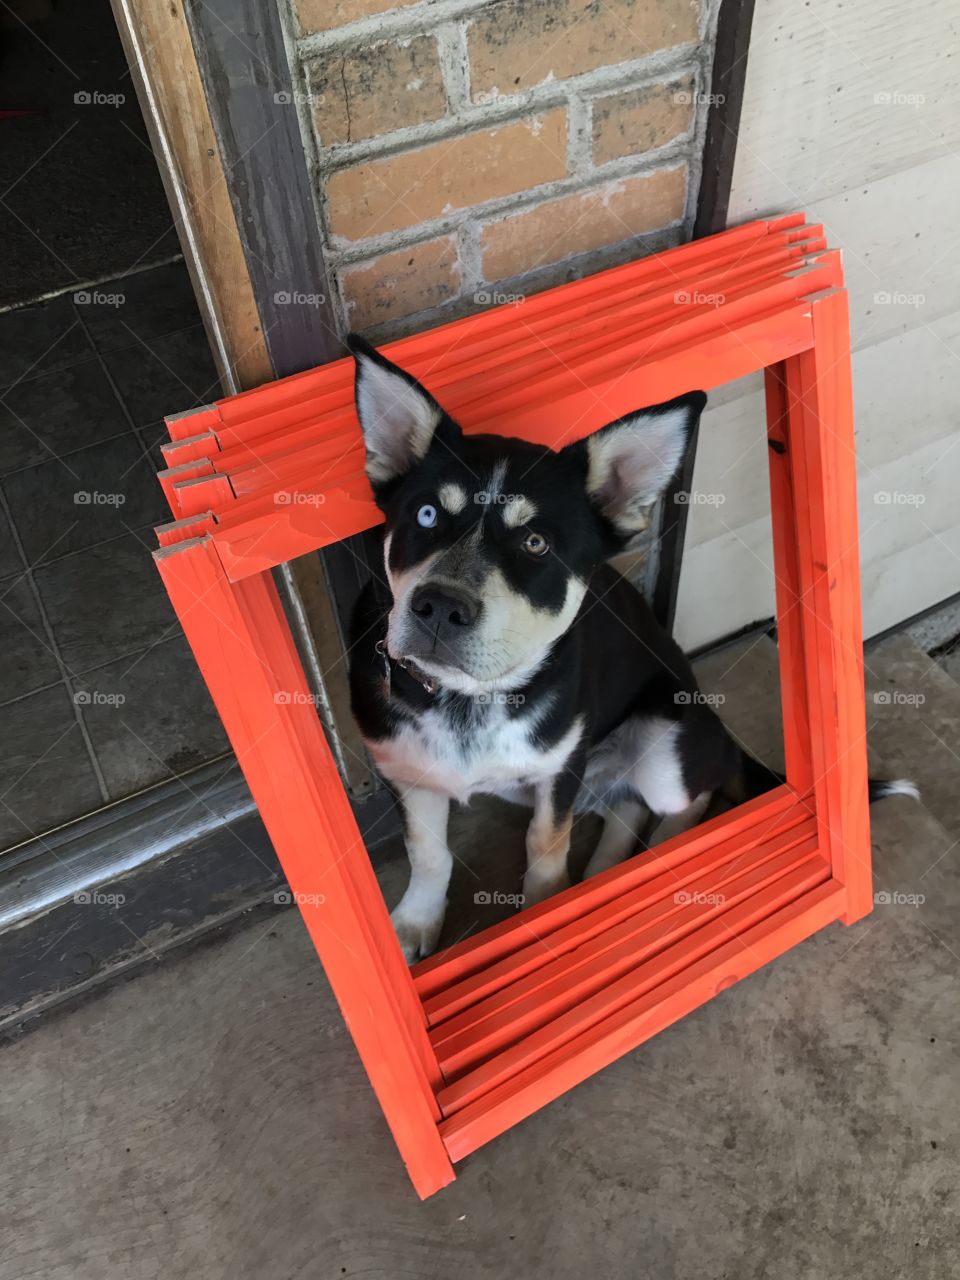 Was making signs for a yard sale and our dog decided to help.